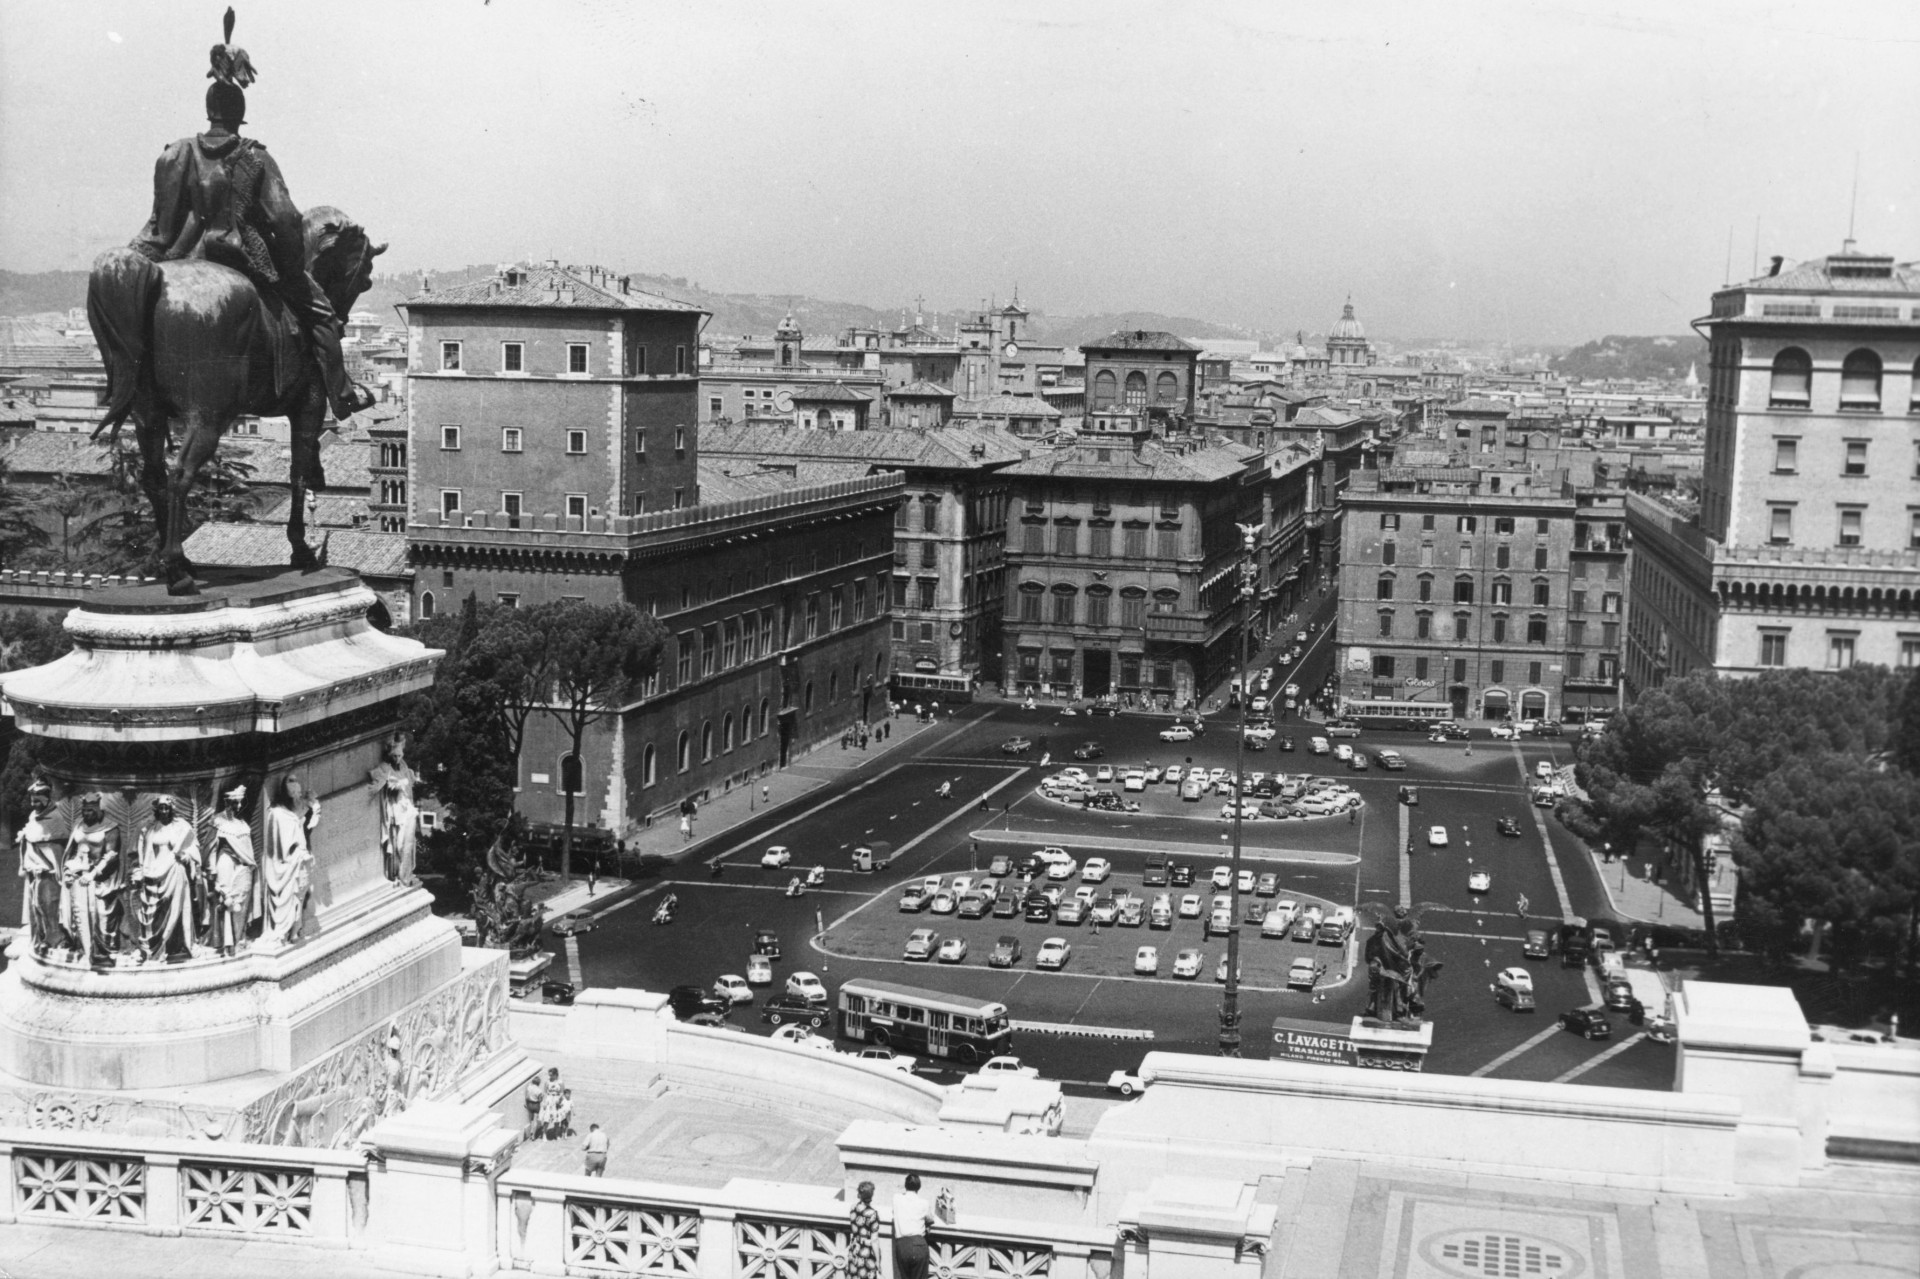 <a href="https://uk.starsinsider.com/travel/262965/discover-amazing-roman-sites-and-ruins-from-across-the-empire">Rome</a>'s Piazza Venezia is one of the Italian capital's main thoroughfares, seen here in 1961.<p><a href="https://www.msn.com/en-us/community/channel/vid-7xx8mnucu55yw63we9va2gwr7uihbxwc68fxqp25x6tg4ftibpra?cvid=94631541bc0f4f89bfd59158d696ad7e">Follow us and access great exclusive content every day</a></p>